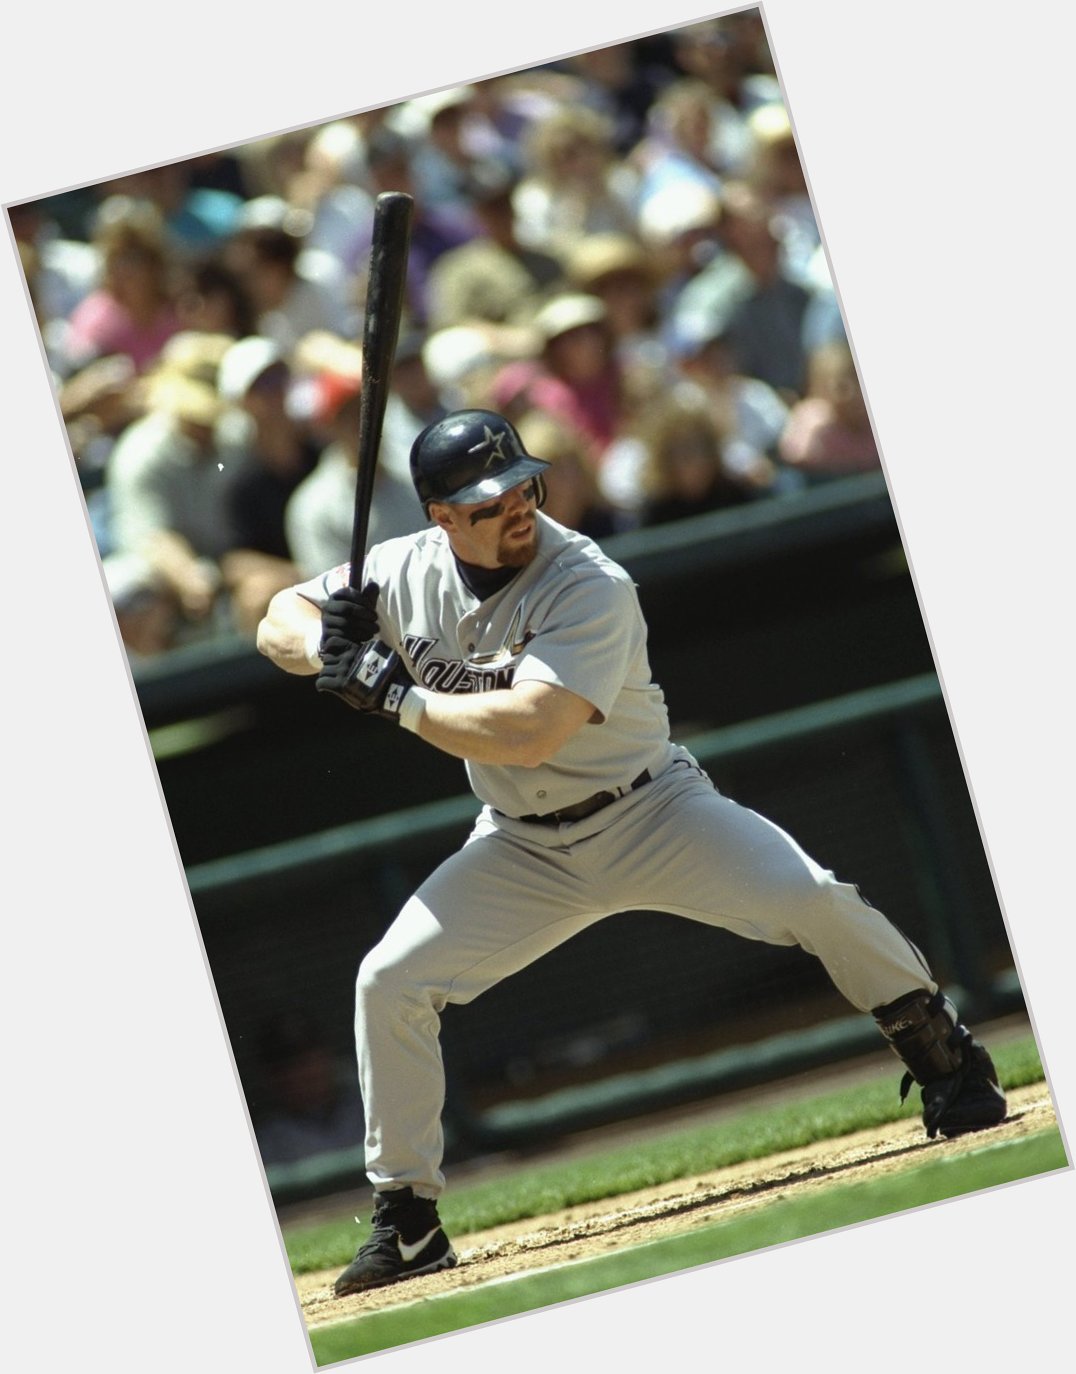 Happy birthday to Jeff Bagwell what a monster he was!

He was so feared that he was walked about 149 times in 1999. 